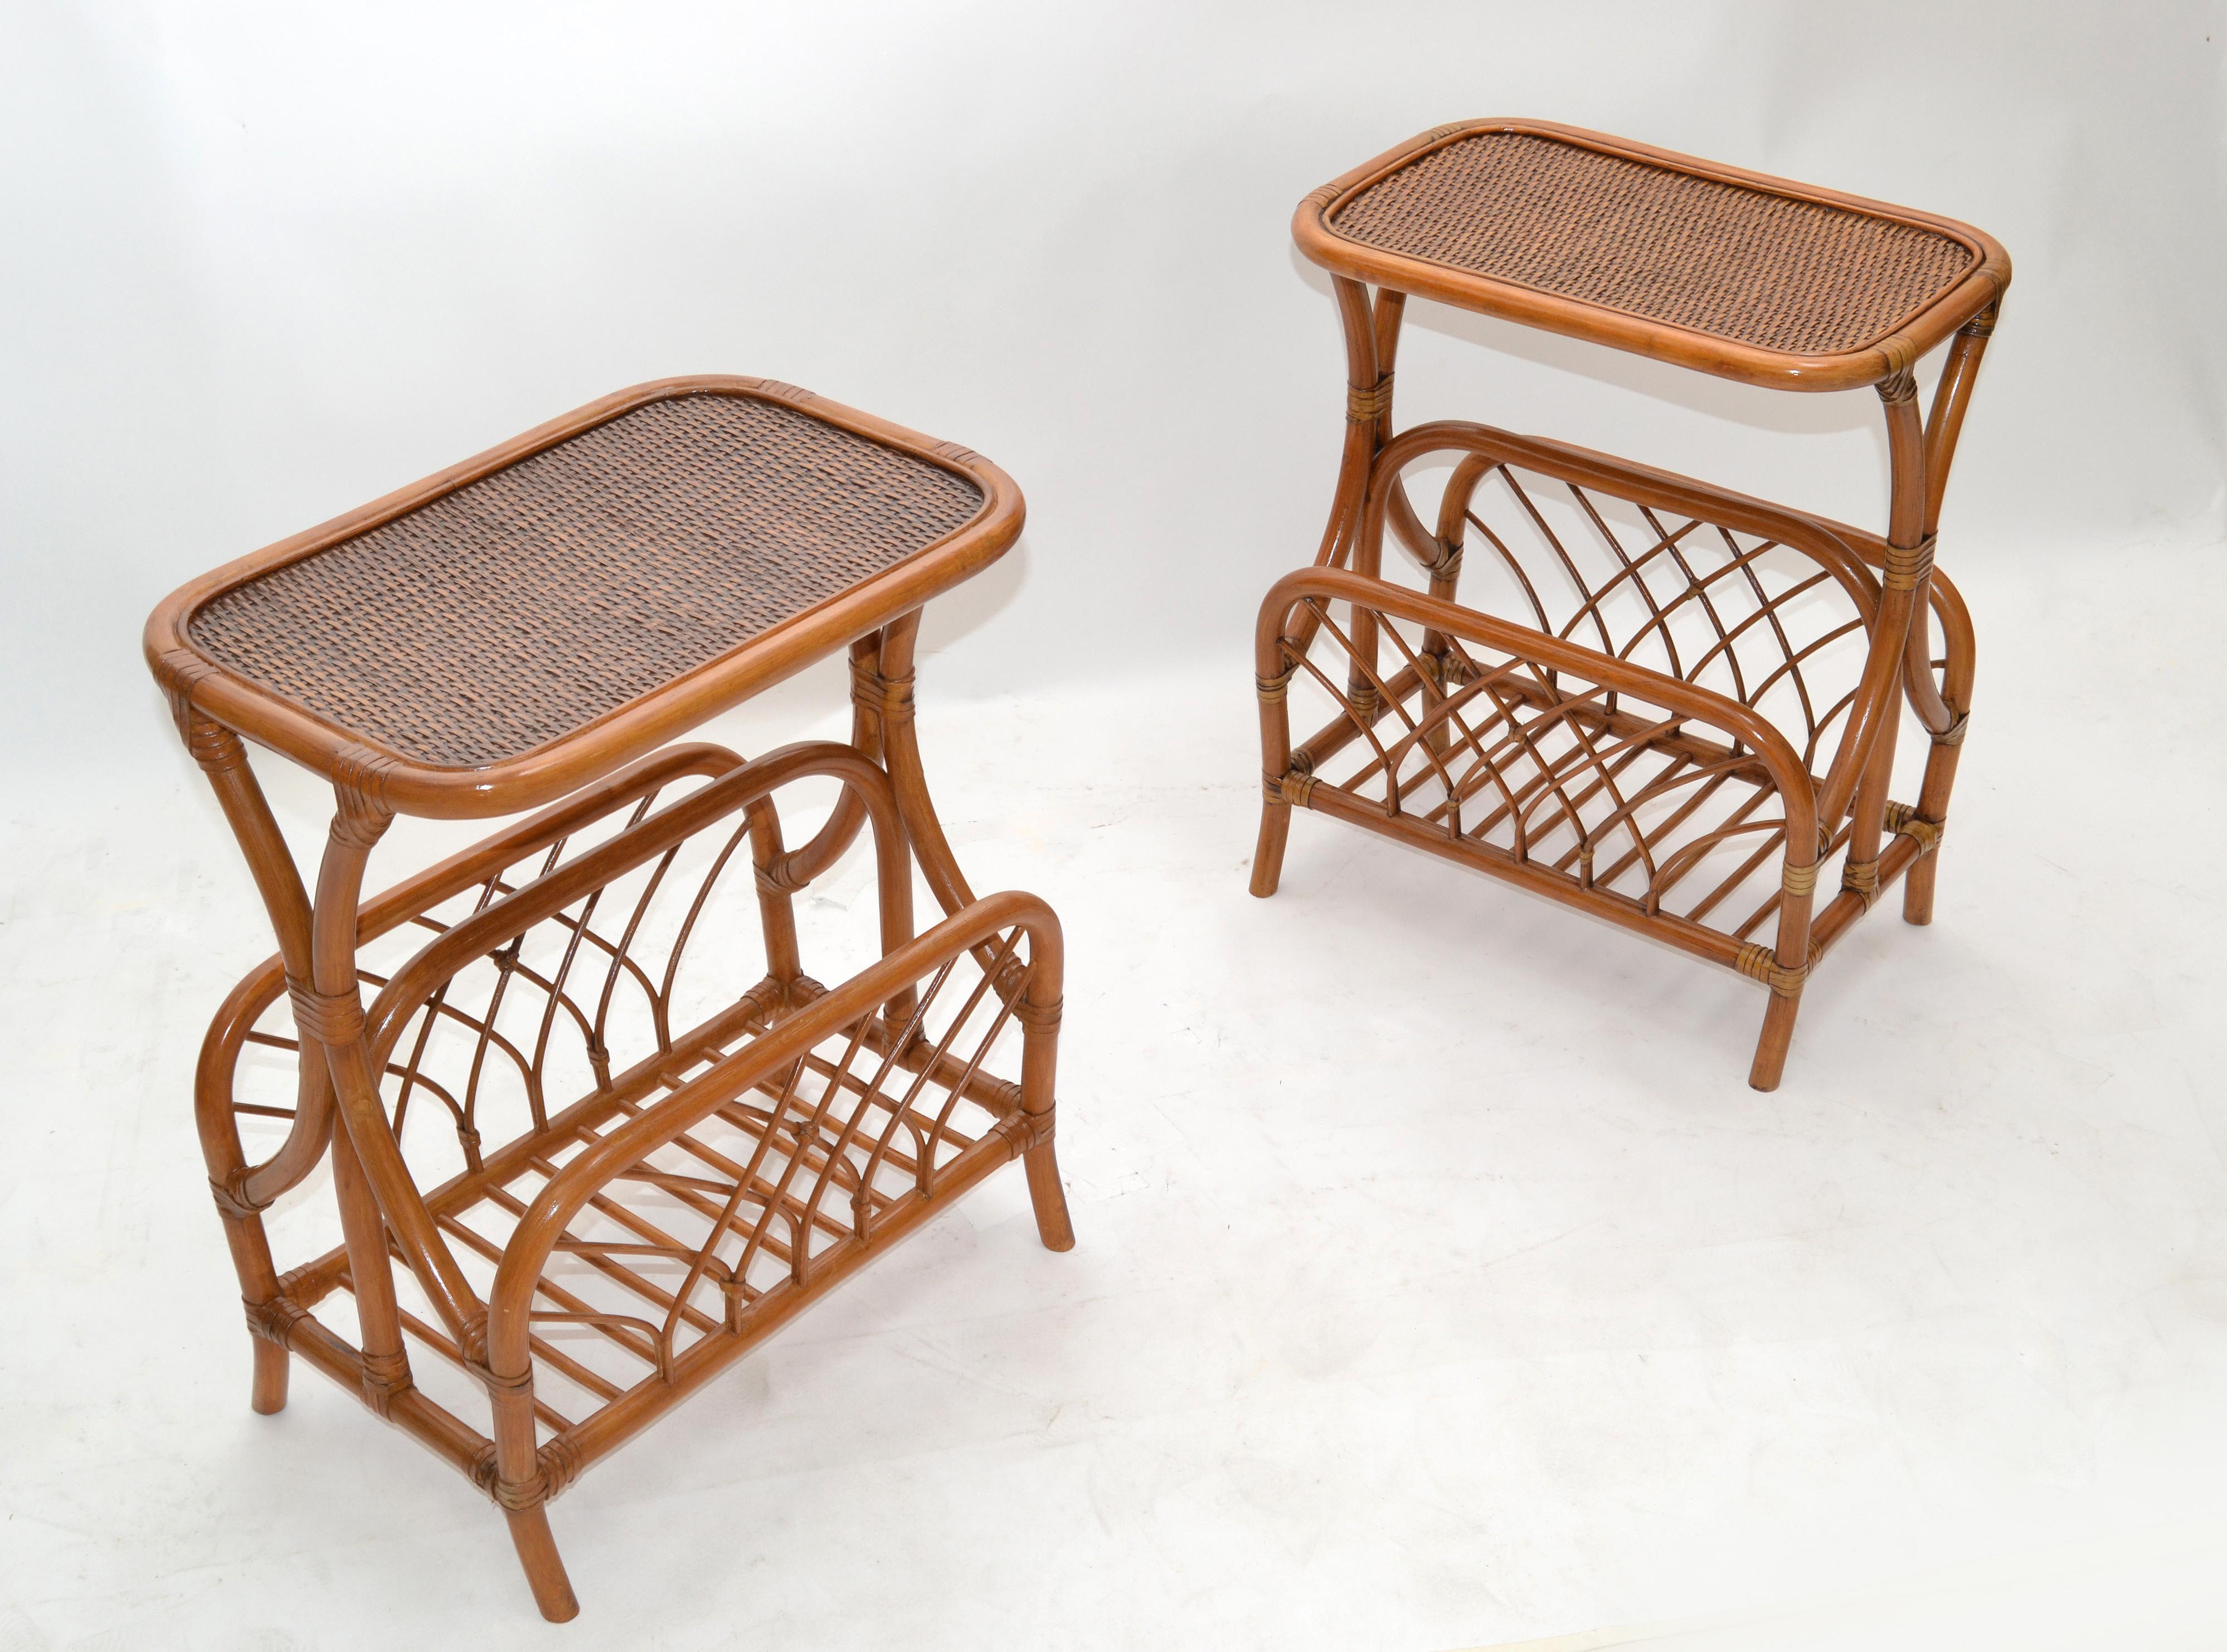 Leather Marked Bamboo & Wicker Mid-Century Modern Side, Bedside Tables Night Stands Pair